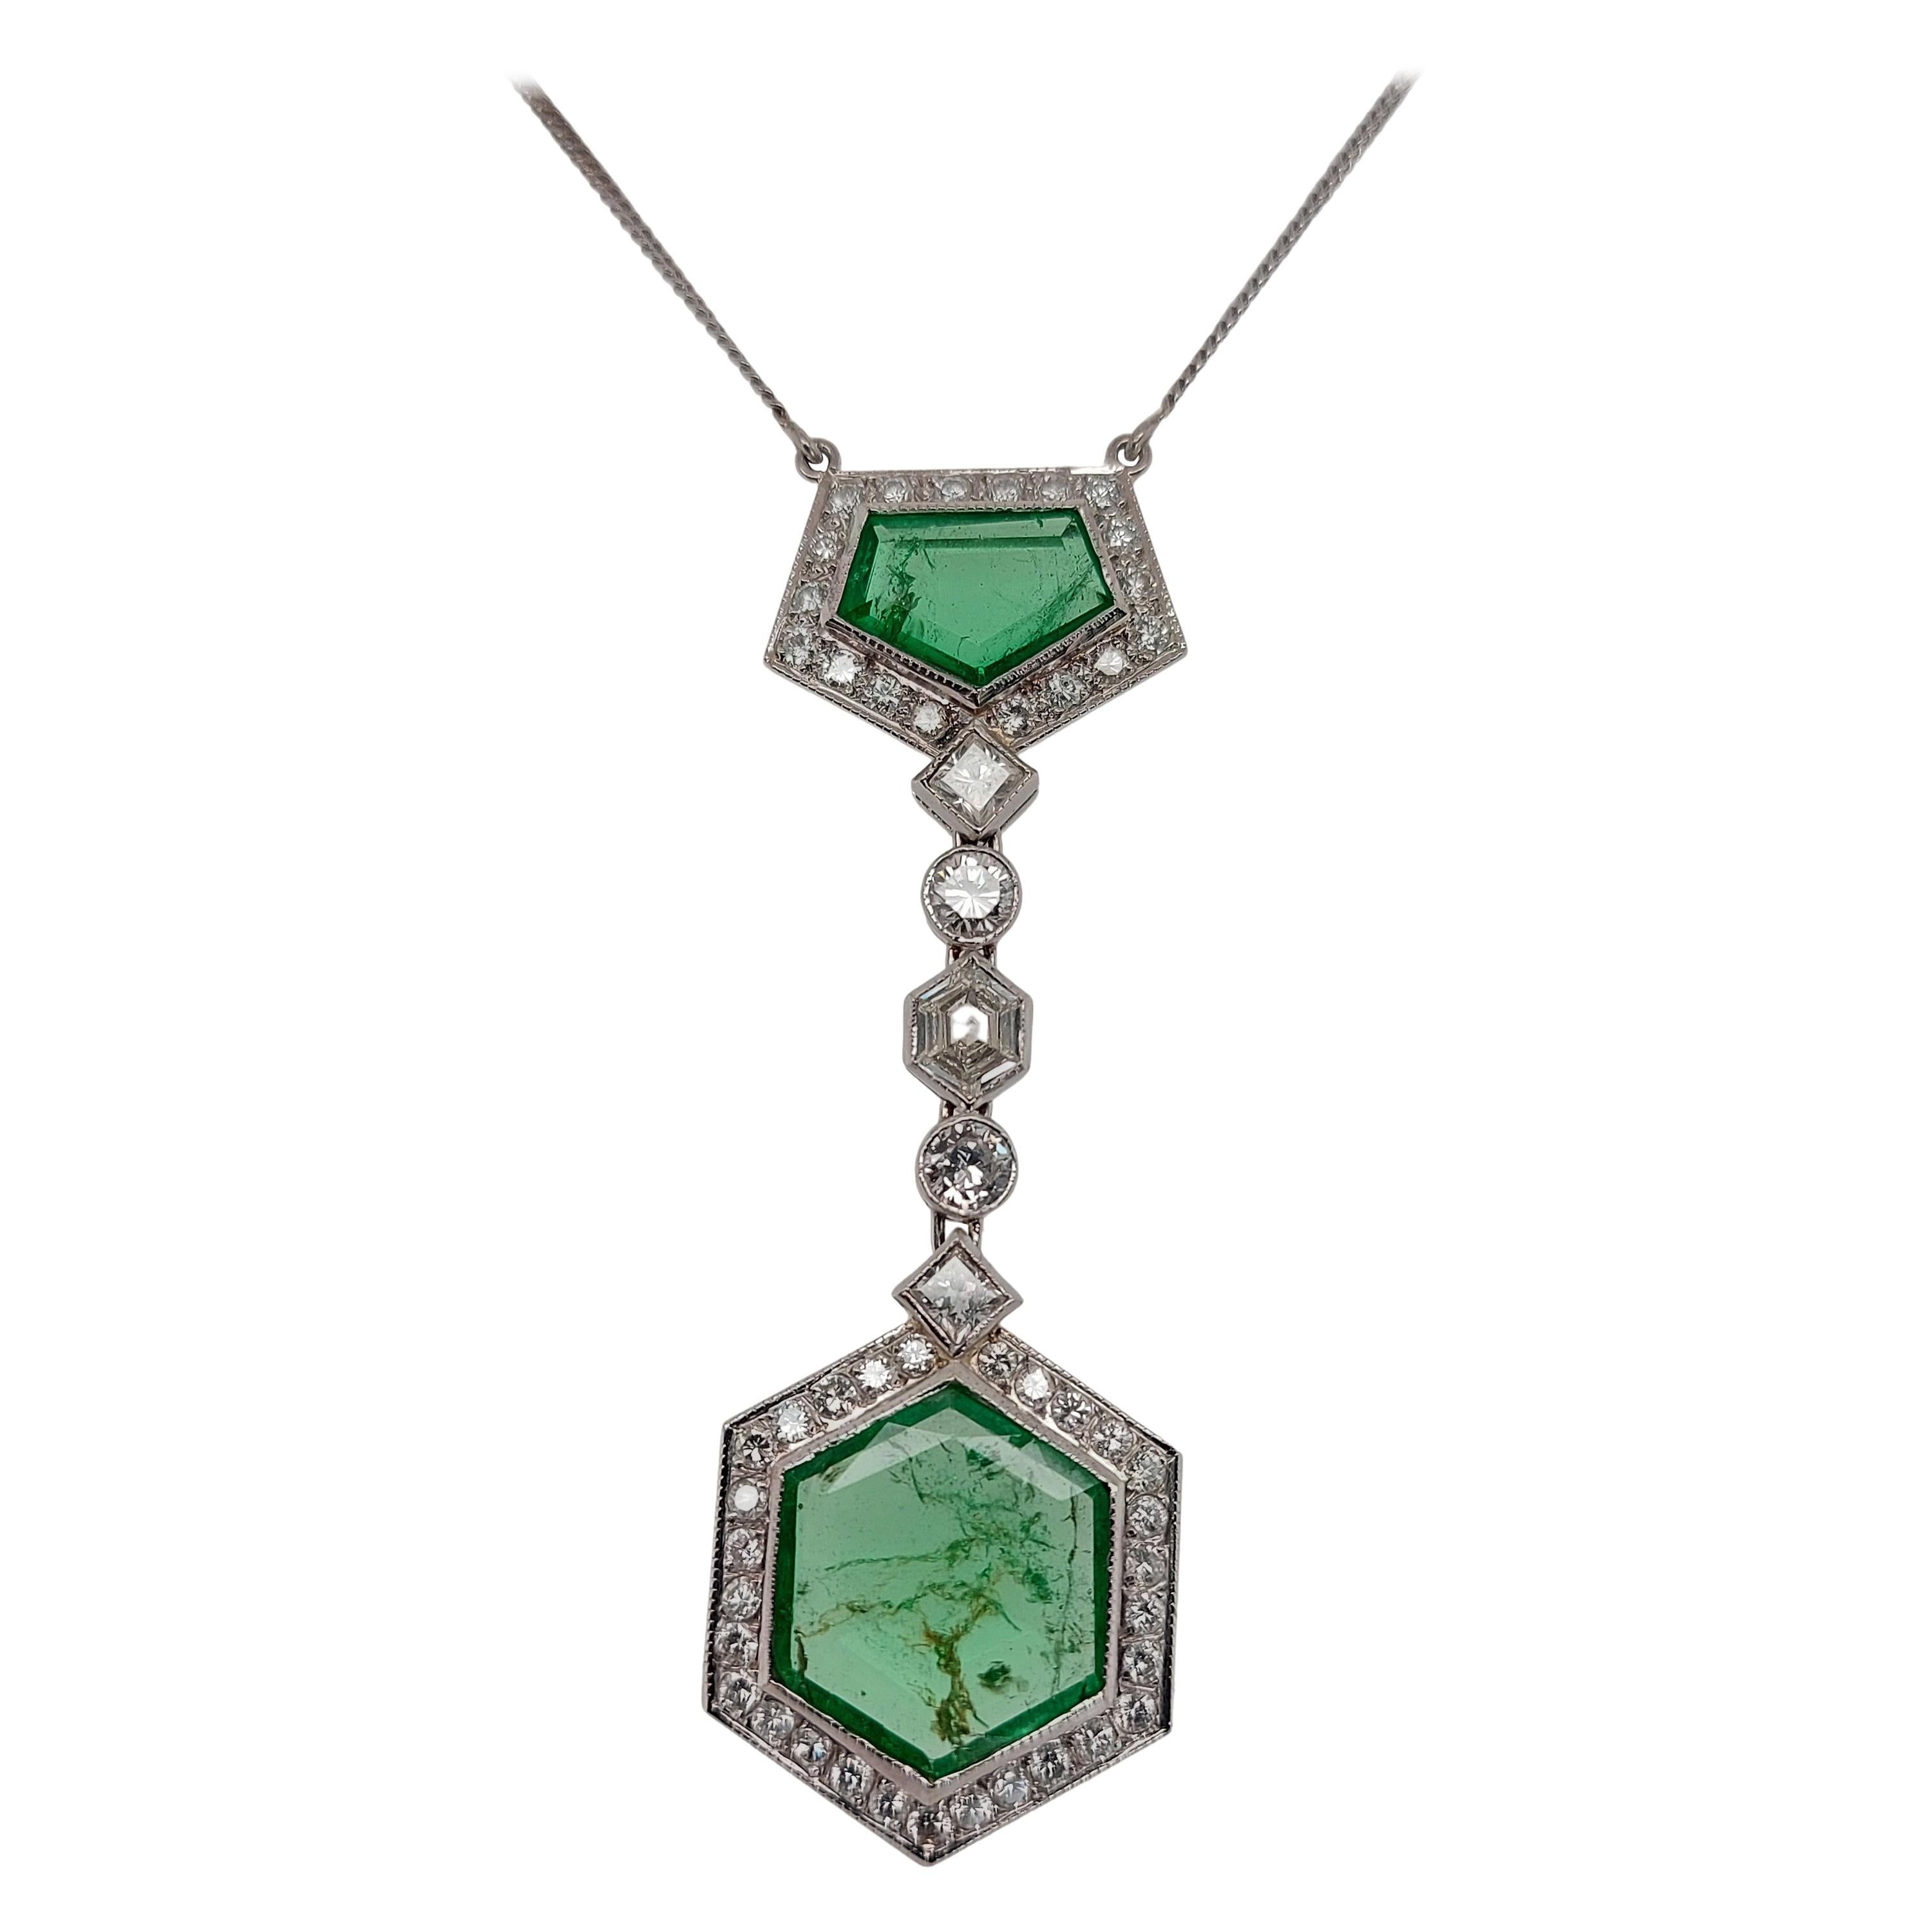 Necklace with 5.5 Carat Colombia Minor Emerald and Diamonds, CGL Certificate